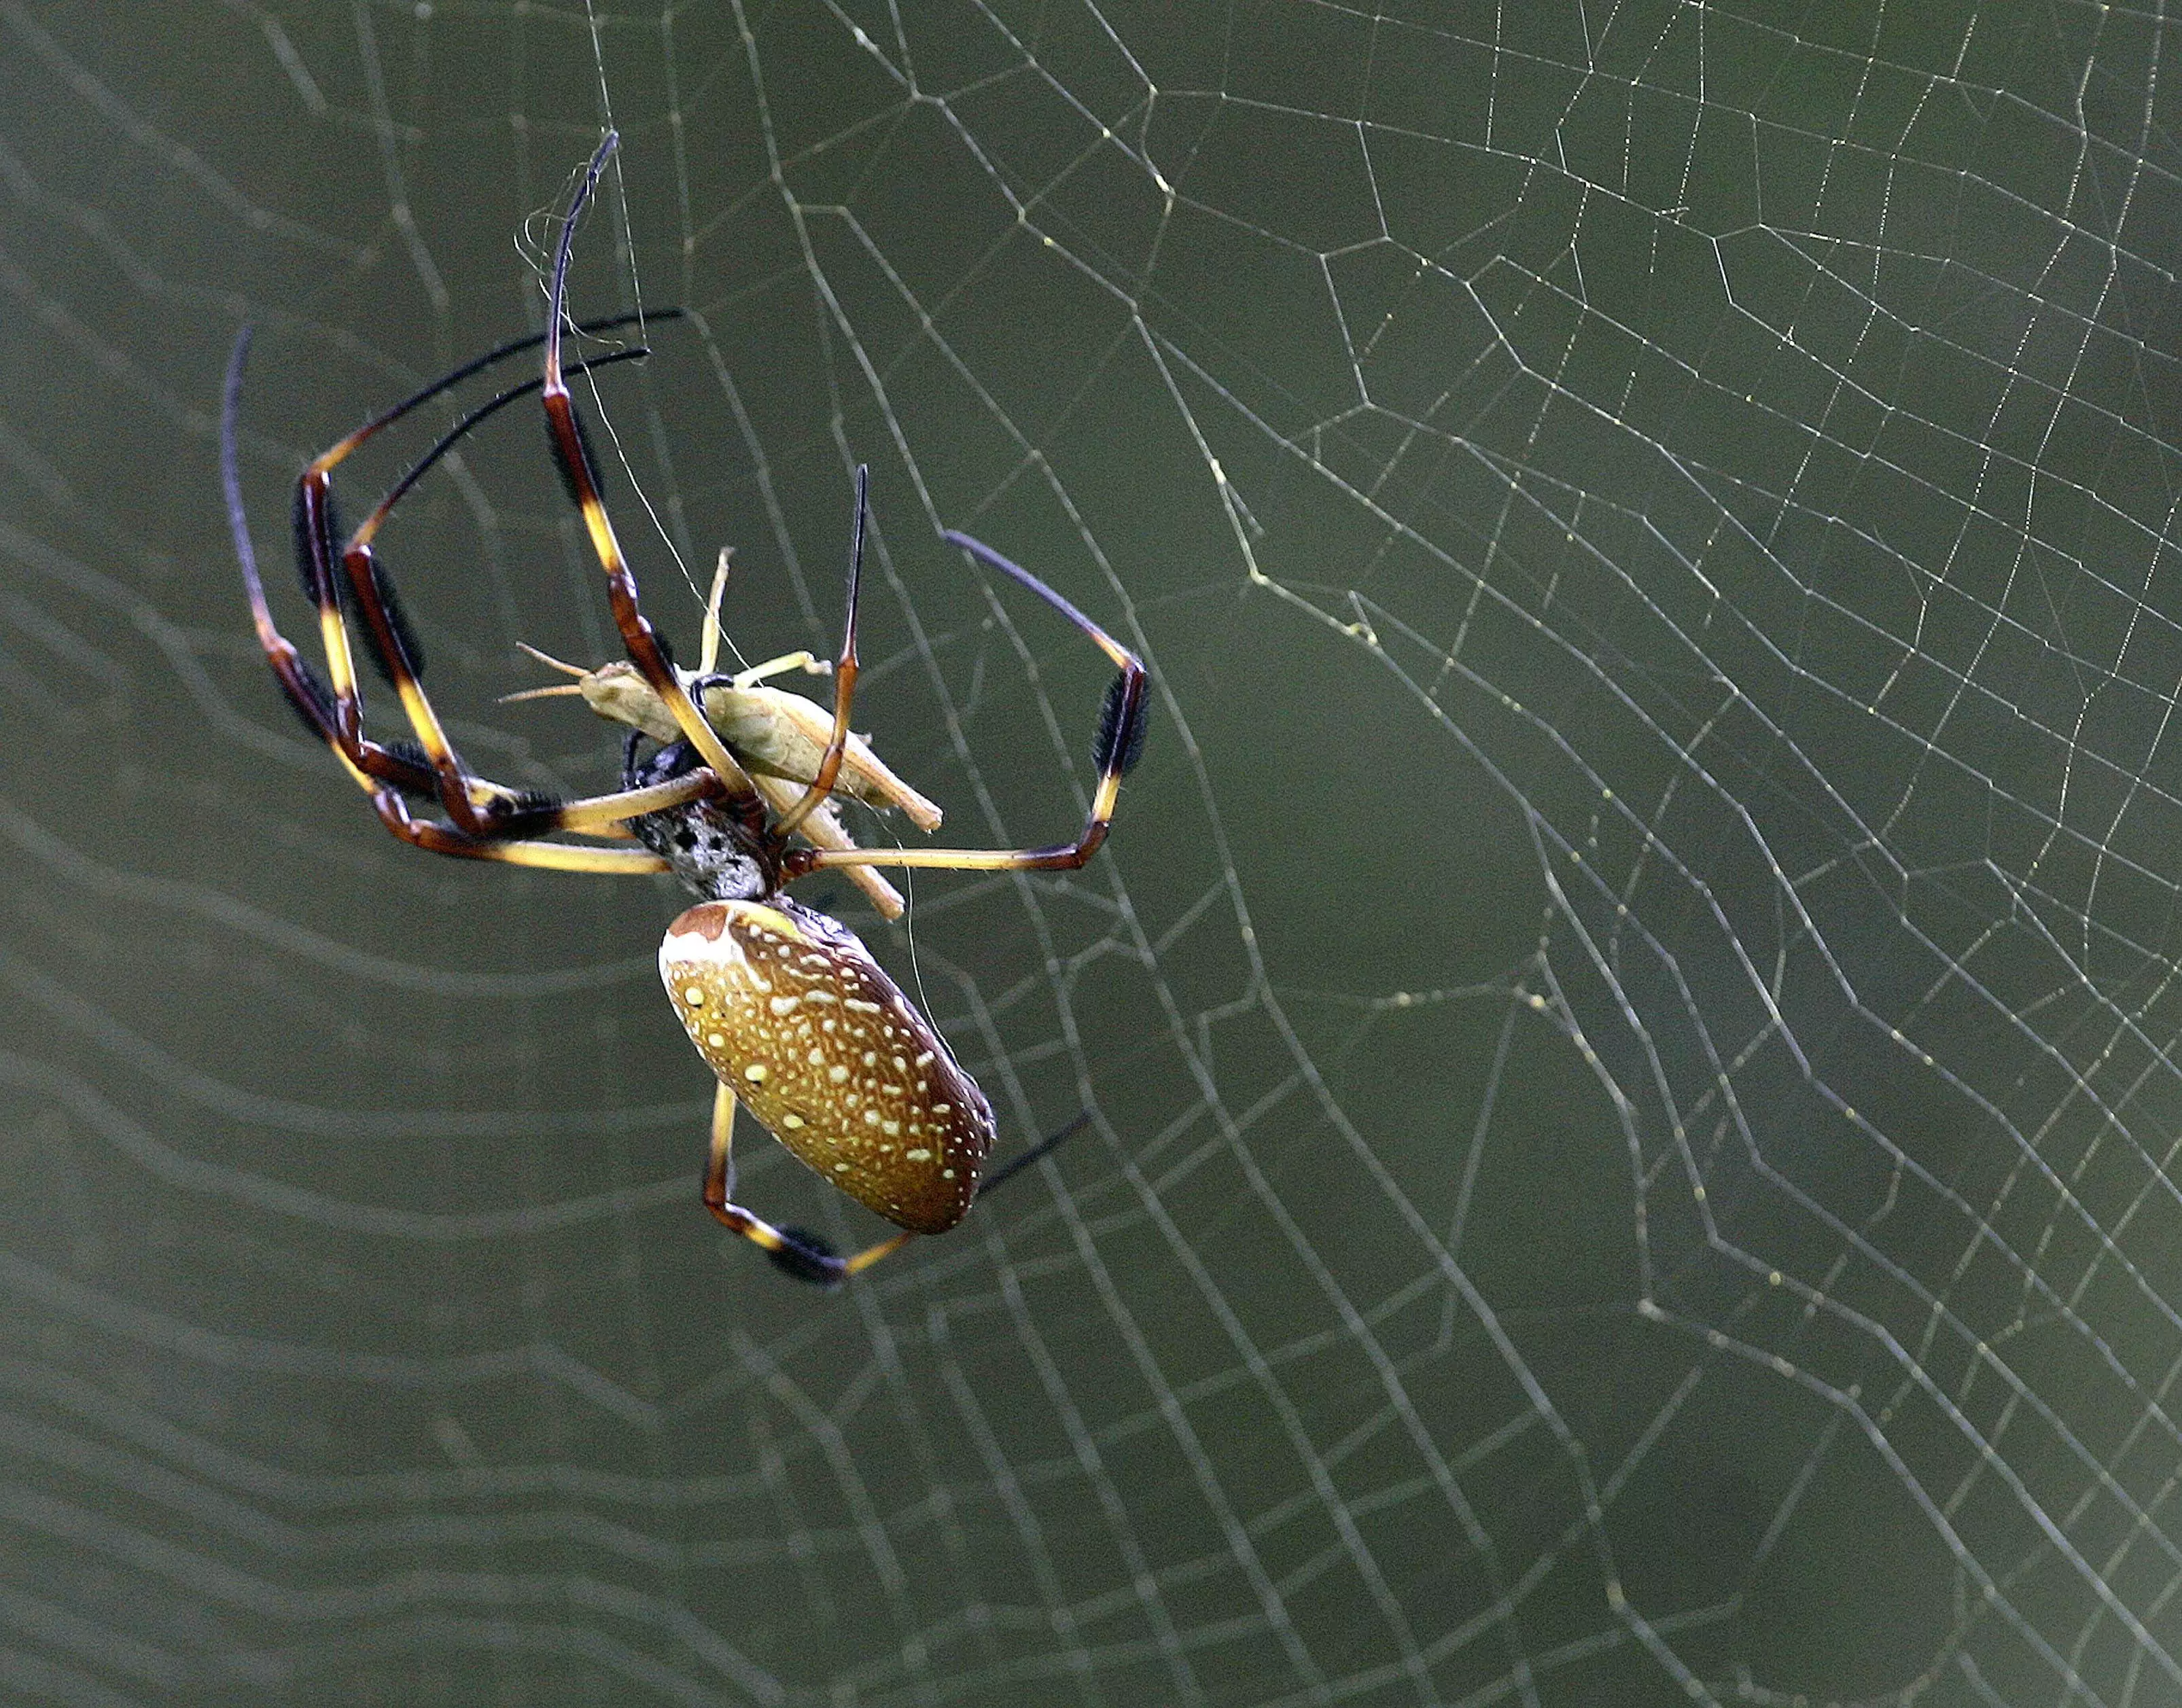 Man Finds Spiders That Cause Four Hour Erections In His Bananas